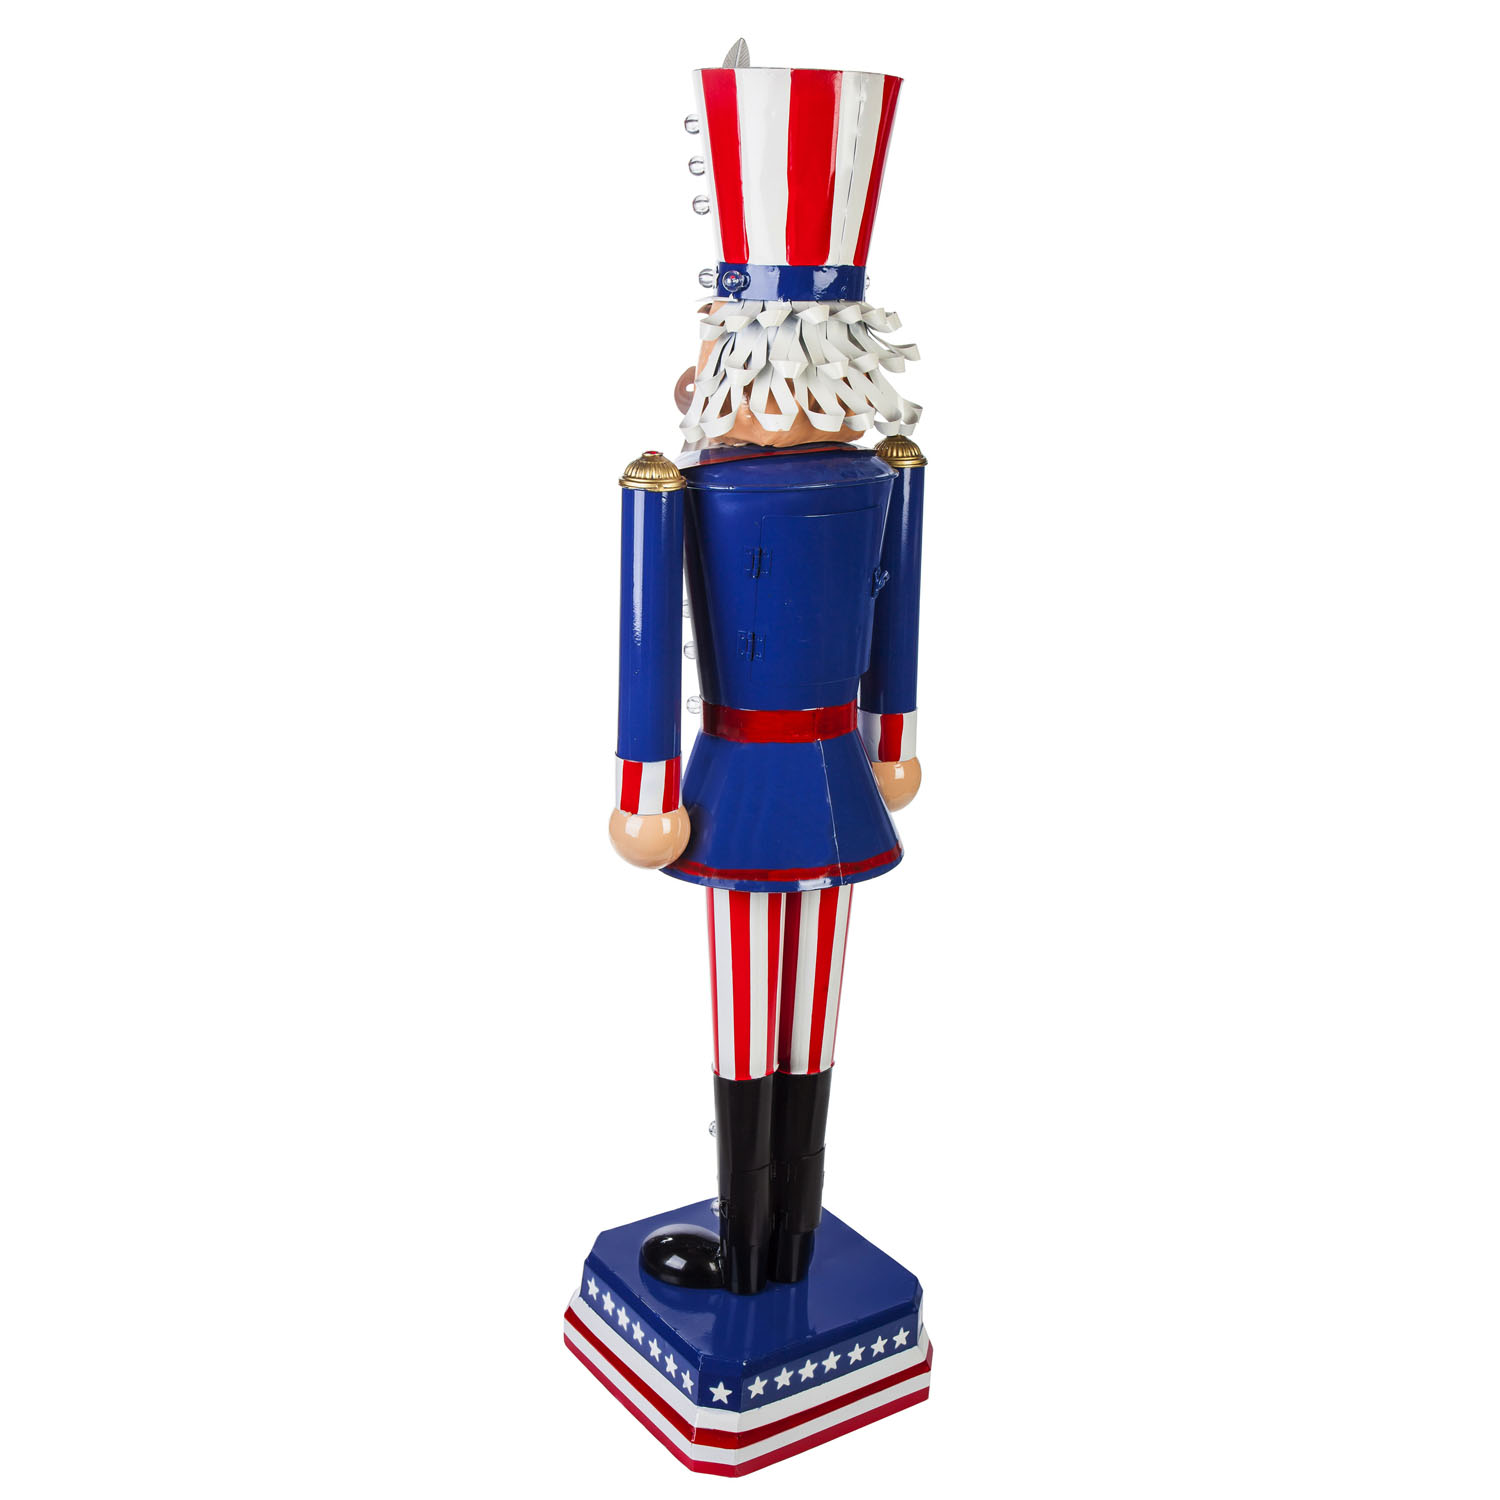 Evergreen 50"H Battery Operated Metal Uncle Sam Garden Statuary, 50.5'' x 9.9'' x 9.9'' inches - image 2 of 3